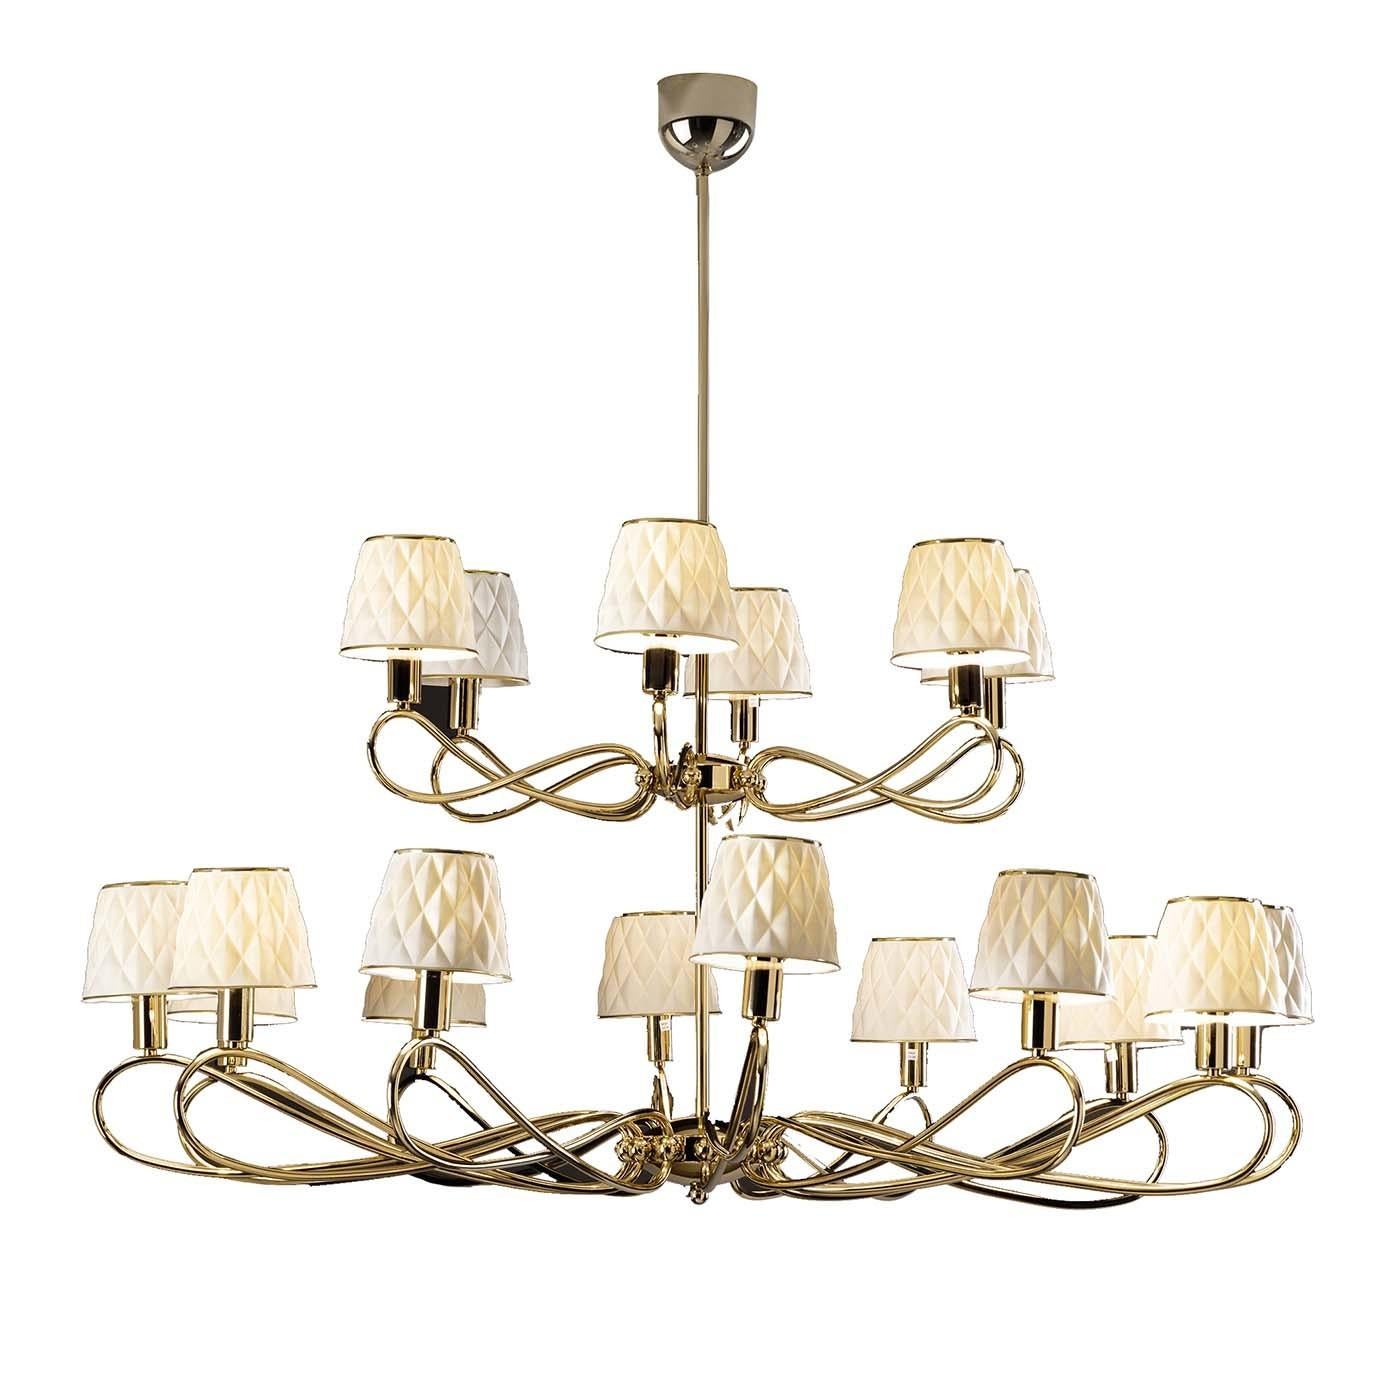 Supported by a sturdy brass frame, this spectacular chandelier strikes with its exceptional elegance. Its tiered silhouette comprises 18 sinuous arms, each sustaining a refined lampshade crafted of matte white porcelain. By folding on themselves,